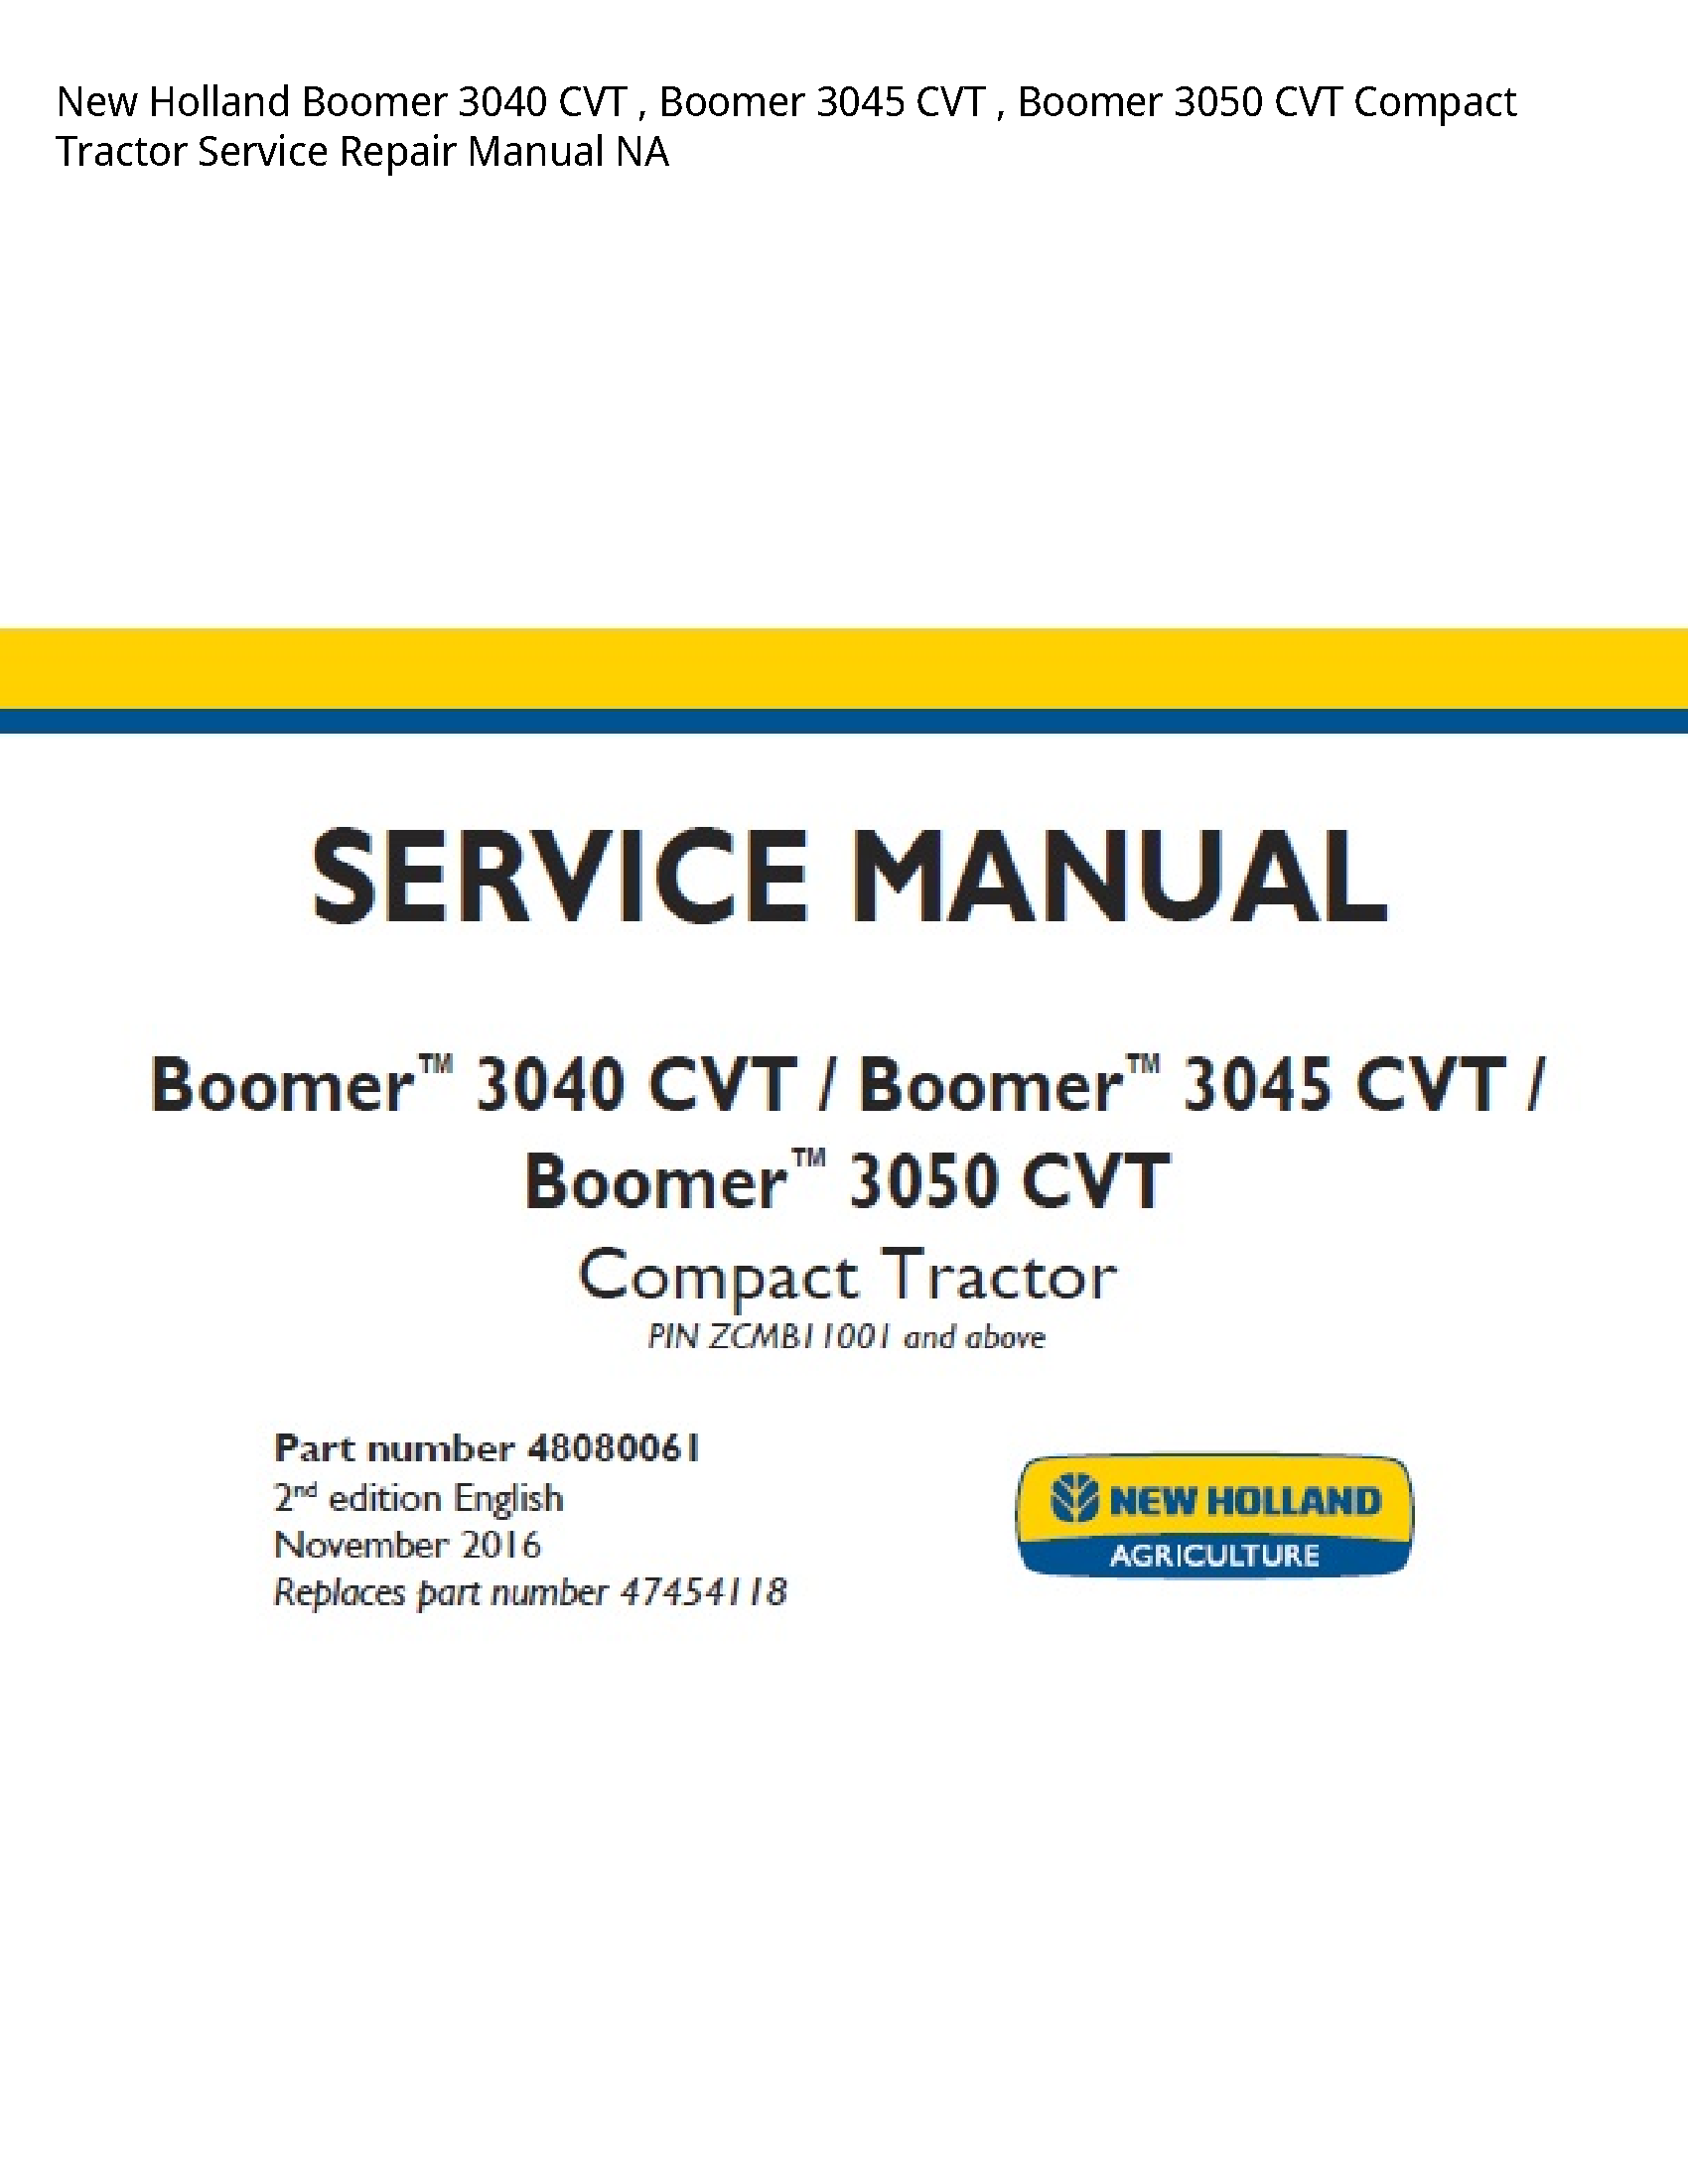 New Holland 3040 Boomer CVT Boomer CVT Boomer CVT Compact Tractor manual